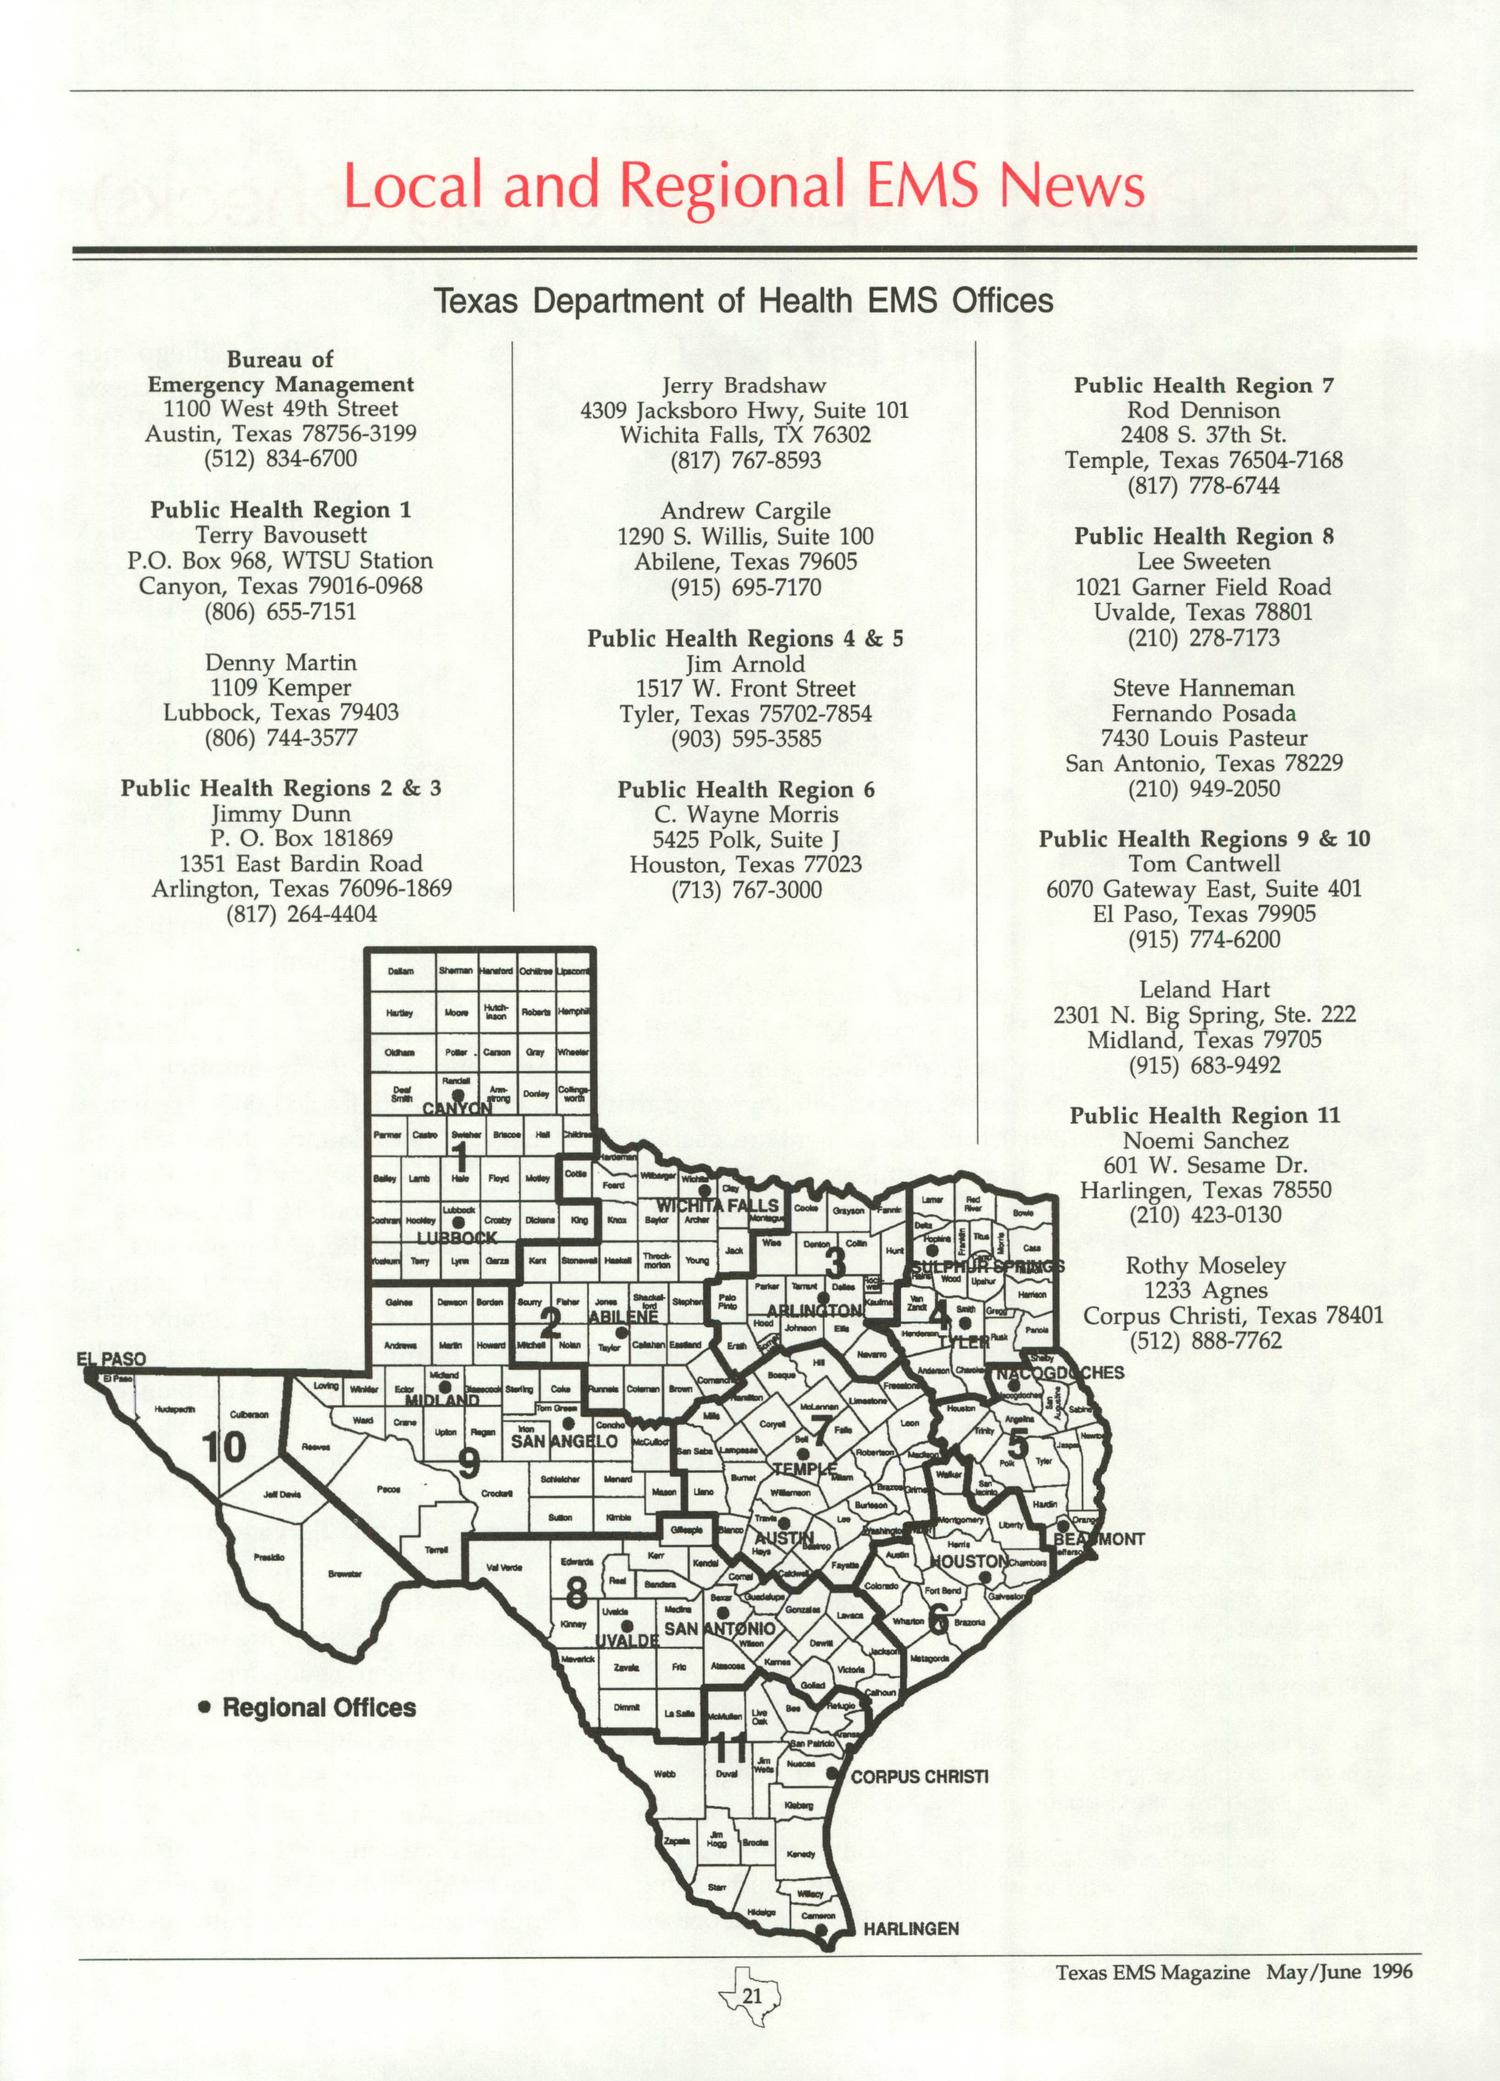 Texas EMS Magazine, Volume 17, Number 3, May/June 1996
                                                
                                                    21
                                                